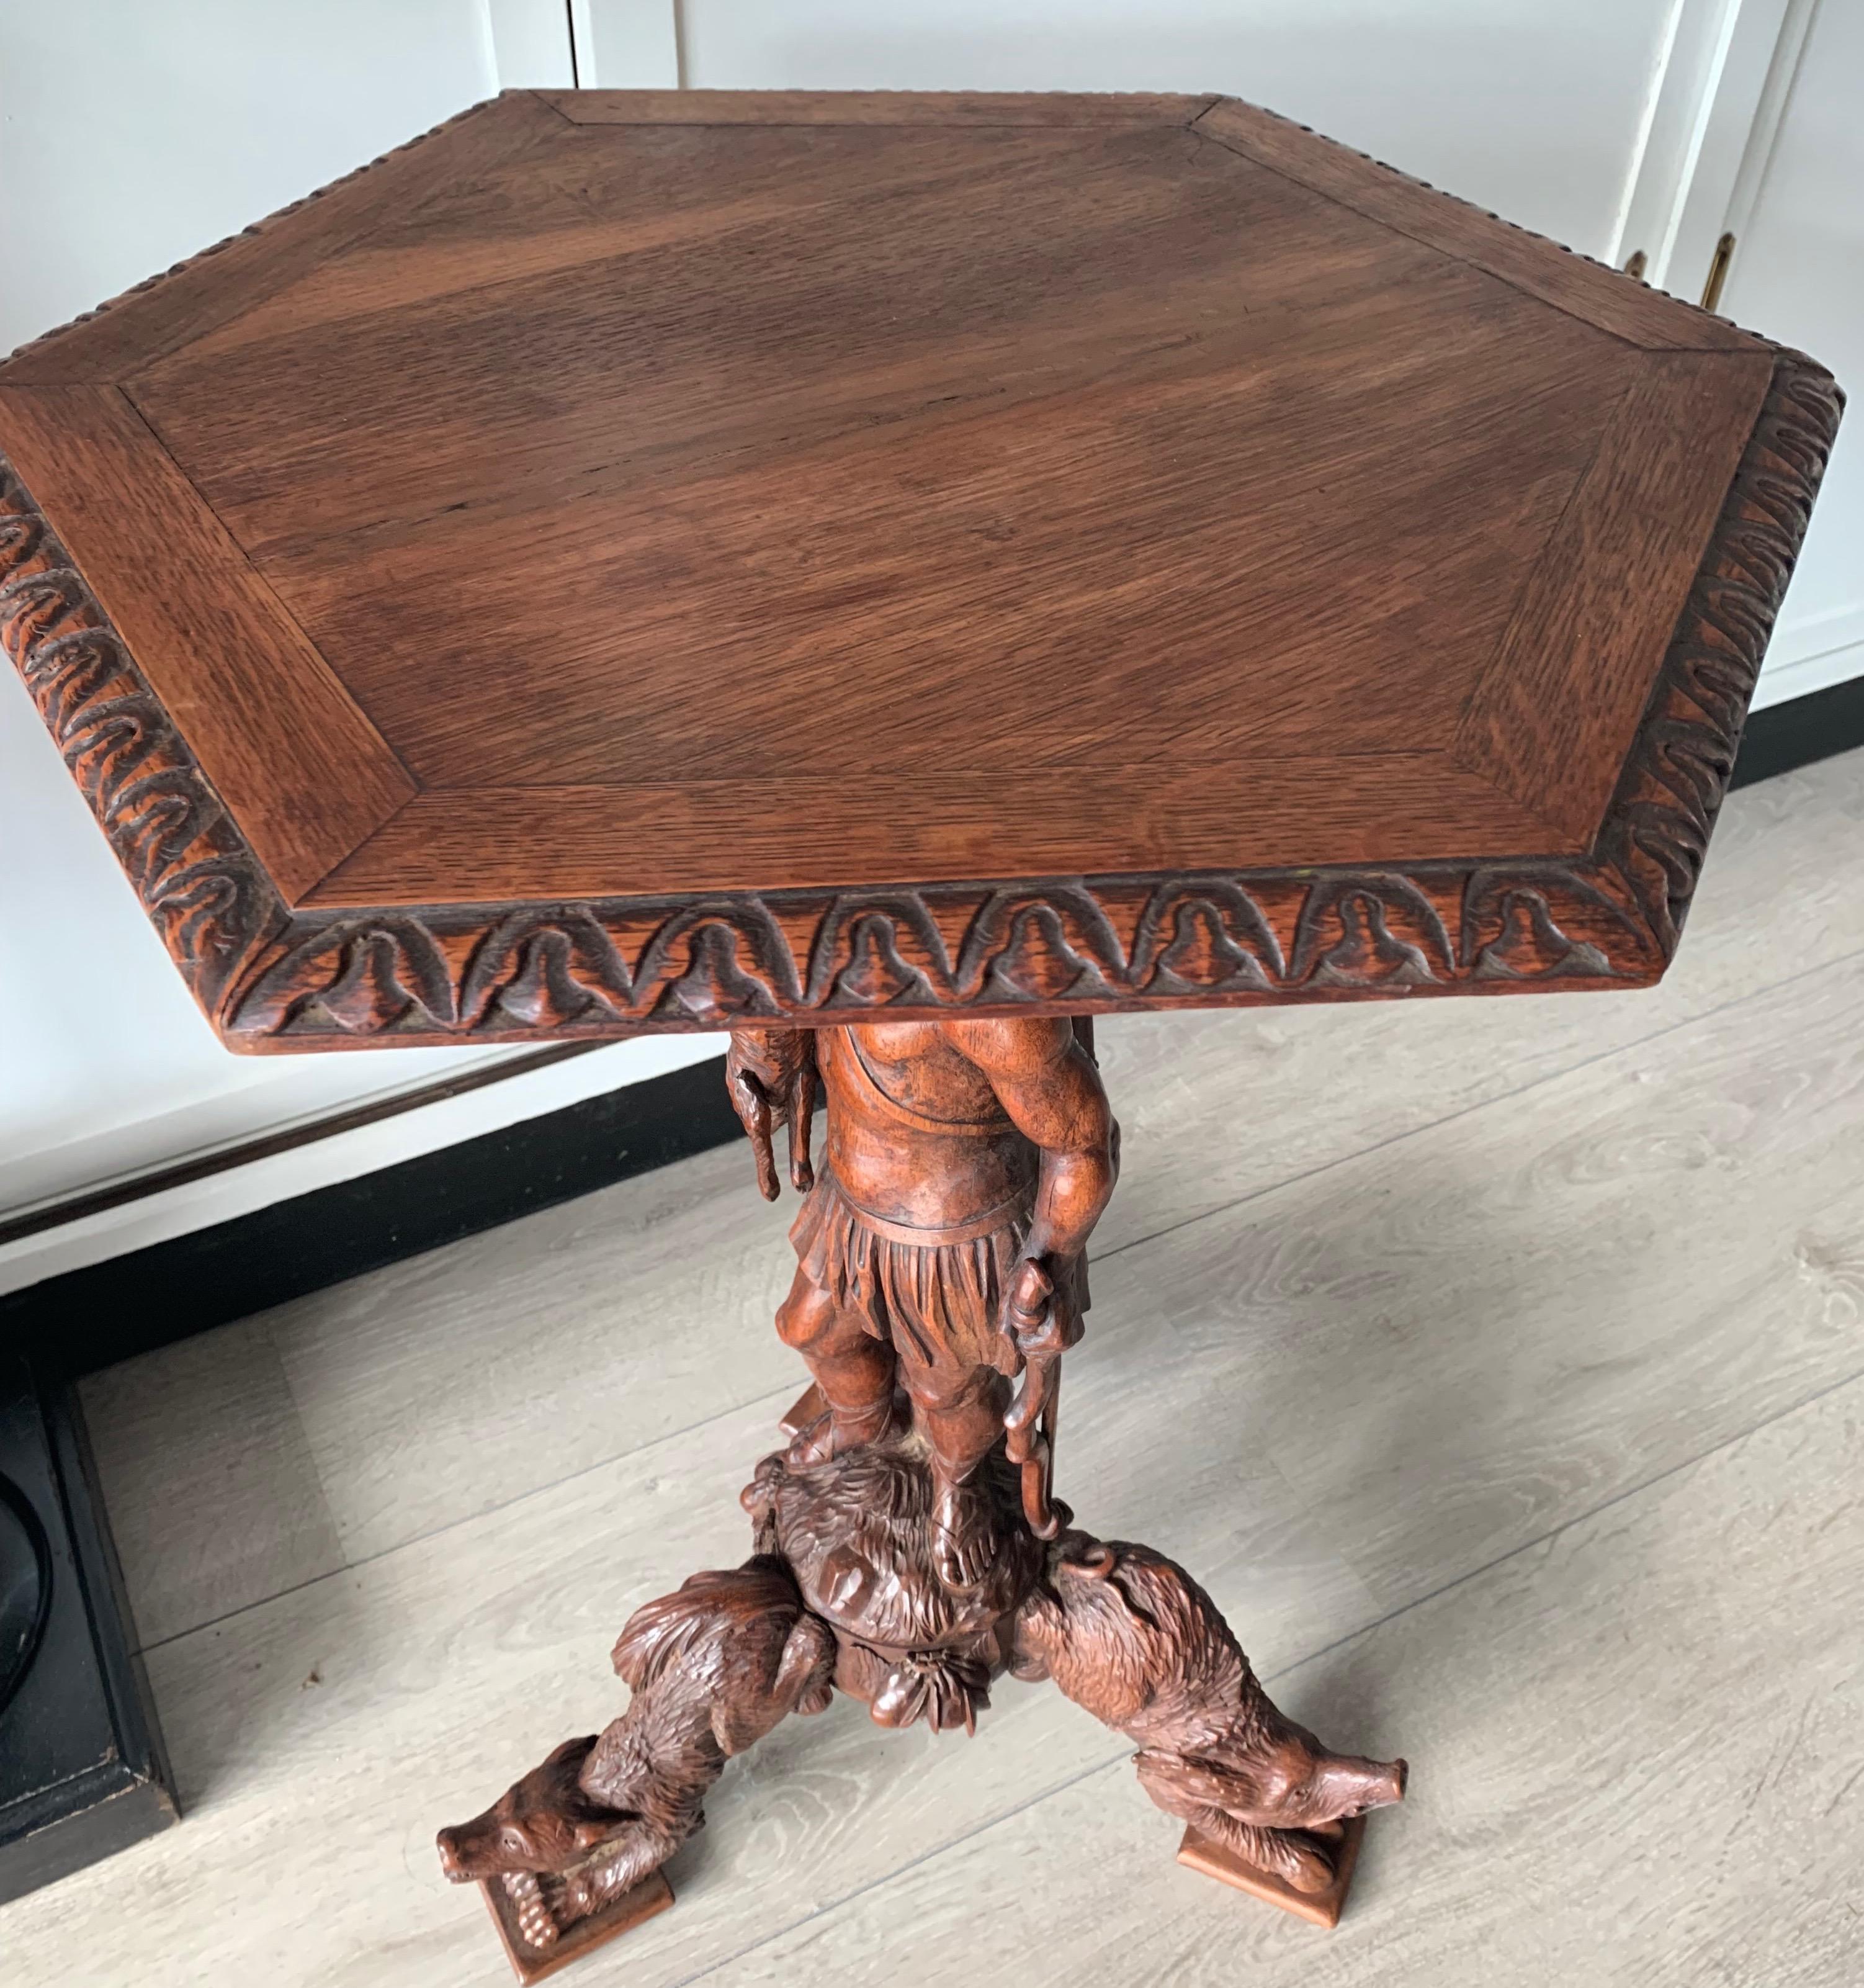 Hand-Crafted Hunting Theme Table with Hand Carved Native Indian & Sculptural Animal Legs